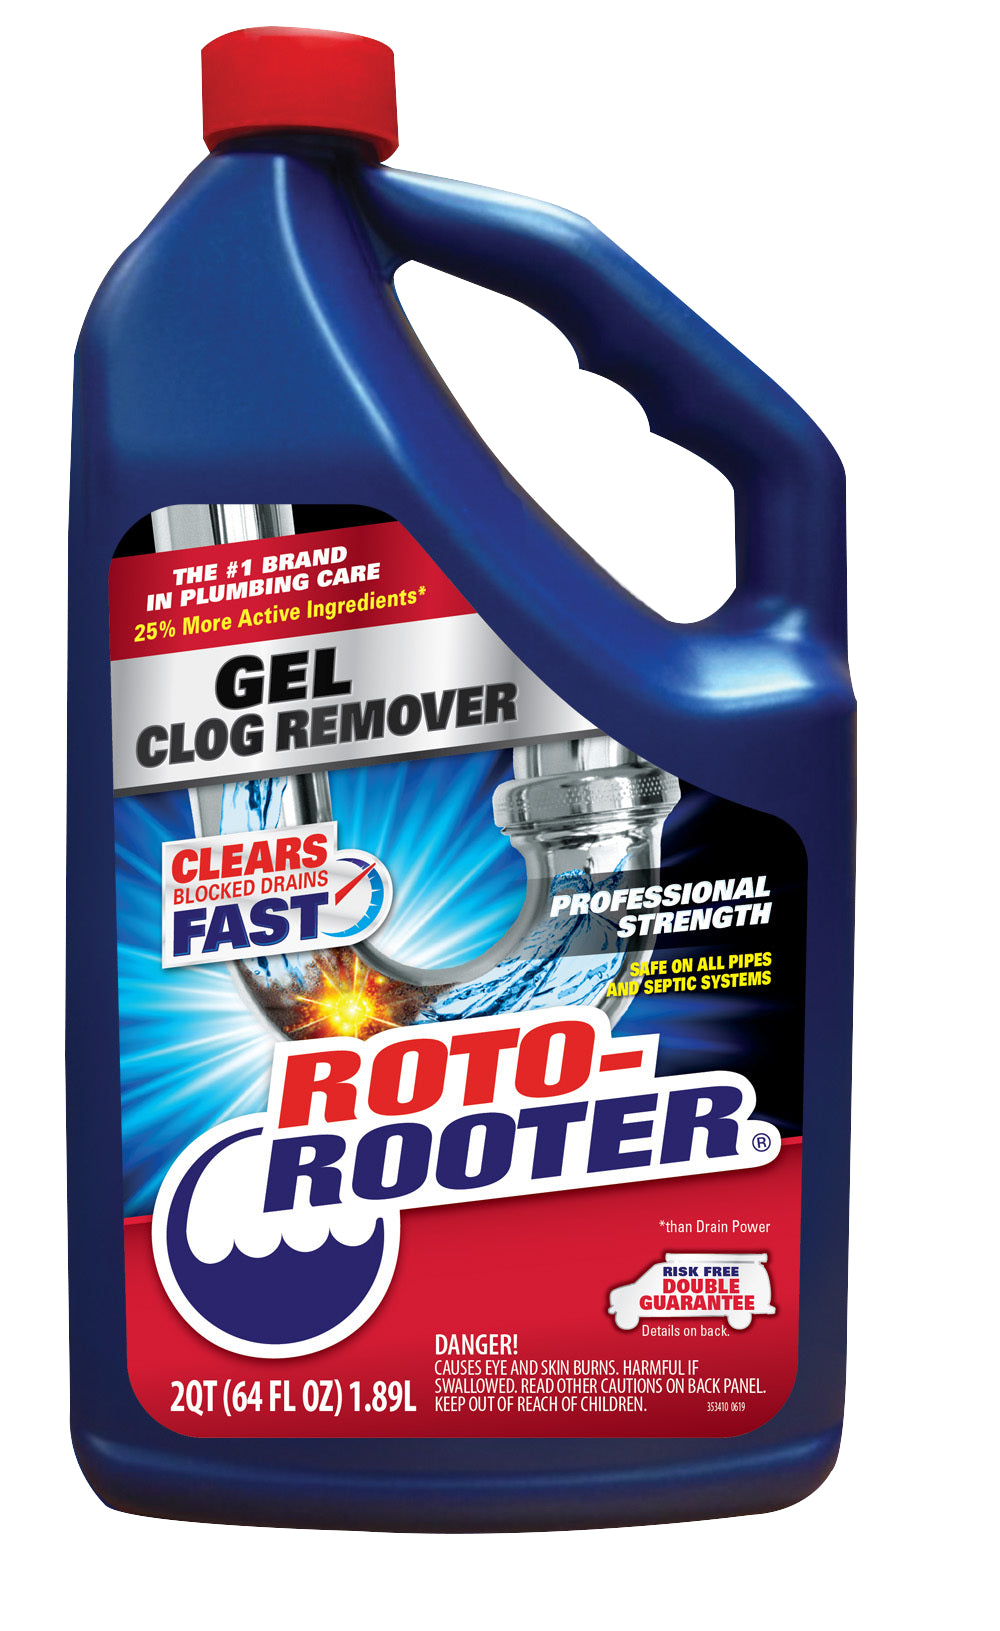 ROTO-ROOTER GEL CLOG REMOVER, 64oz